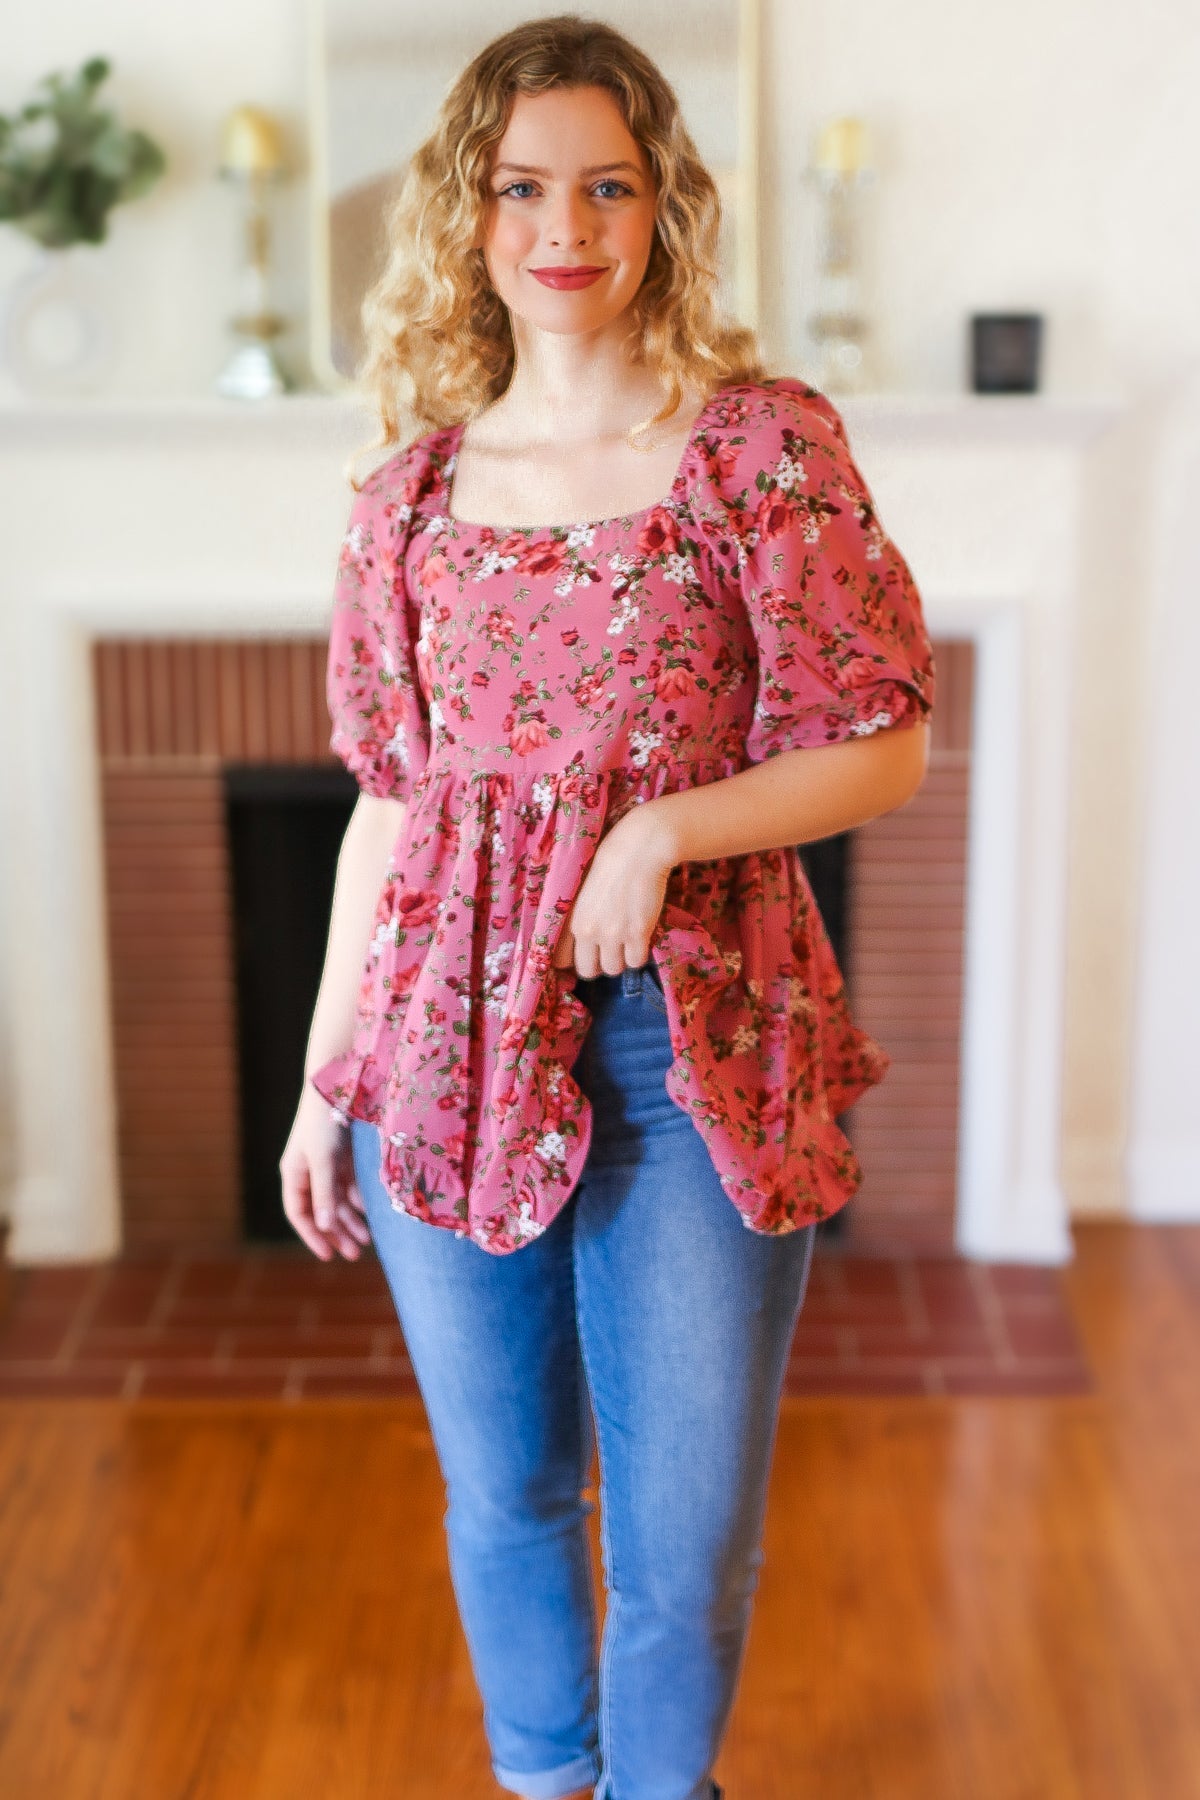 Dusty Rose Floral Print Smocked Puff Sleeve Top